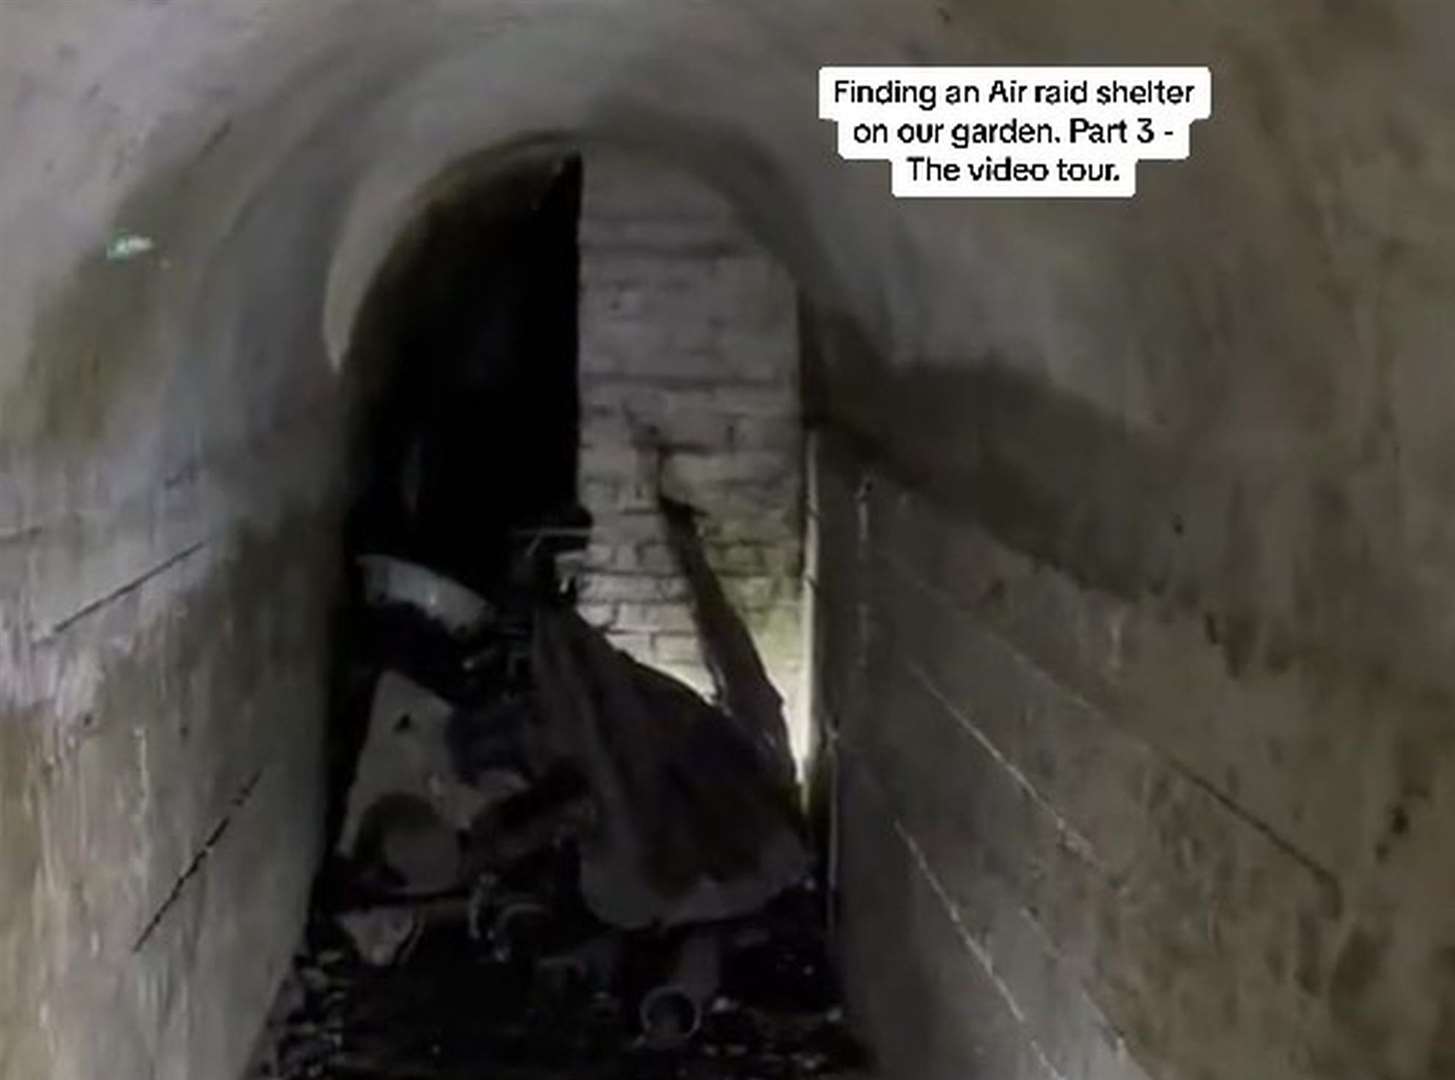 The duo discovered the tunnel after locals suggested there may be 'something in the garden' dating back to the Second World War